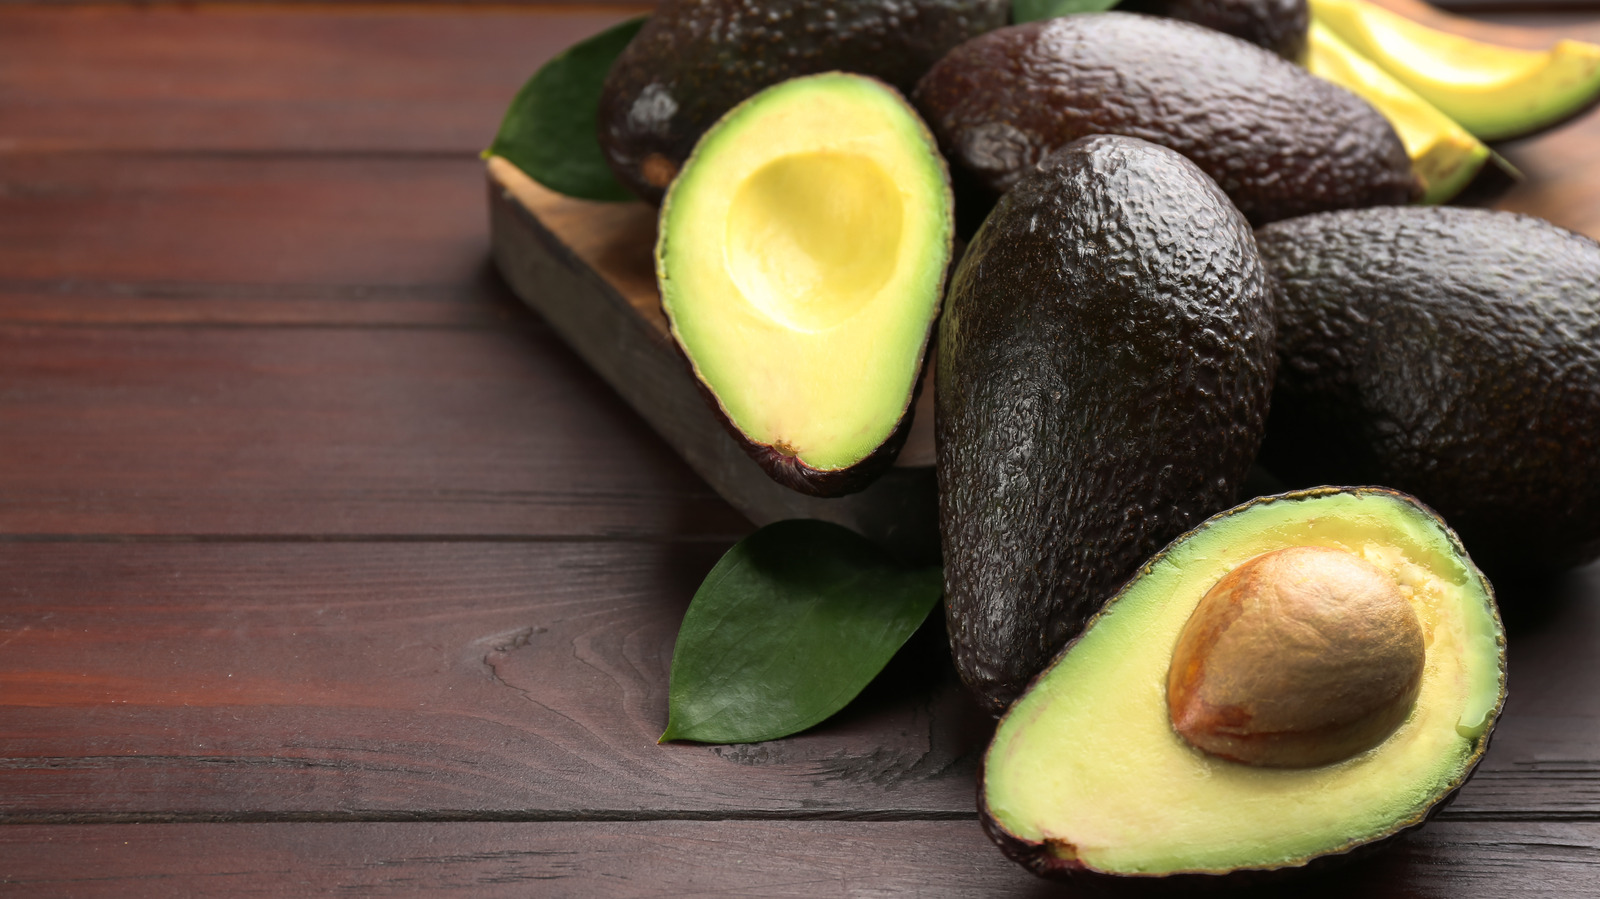 Benefits Of Avocados For Health